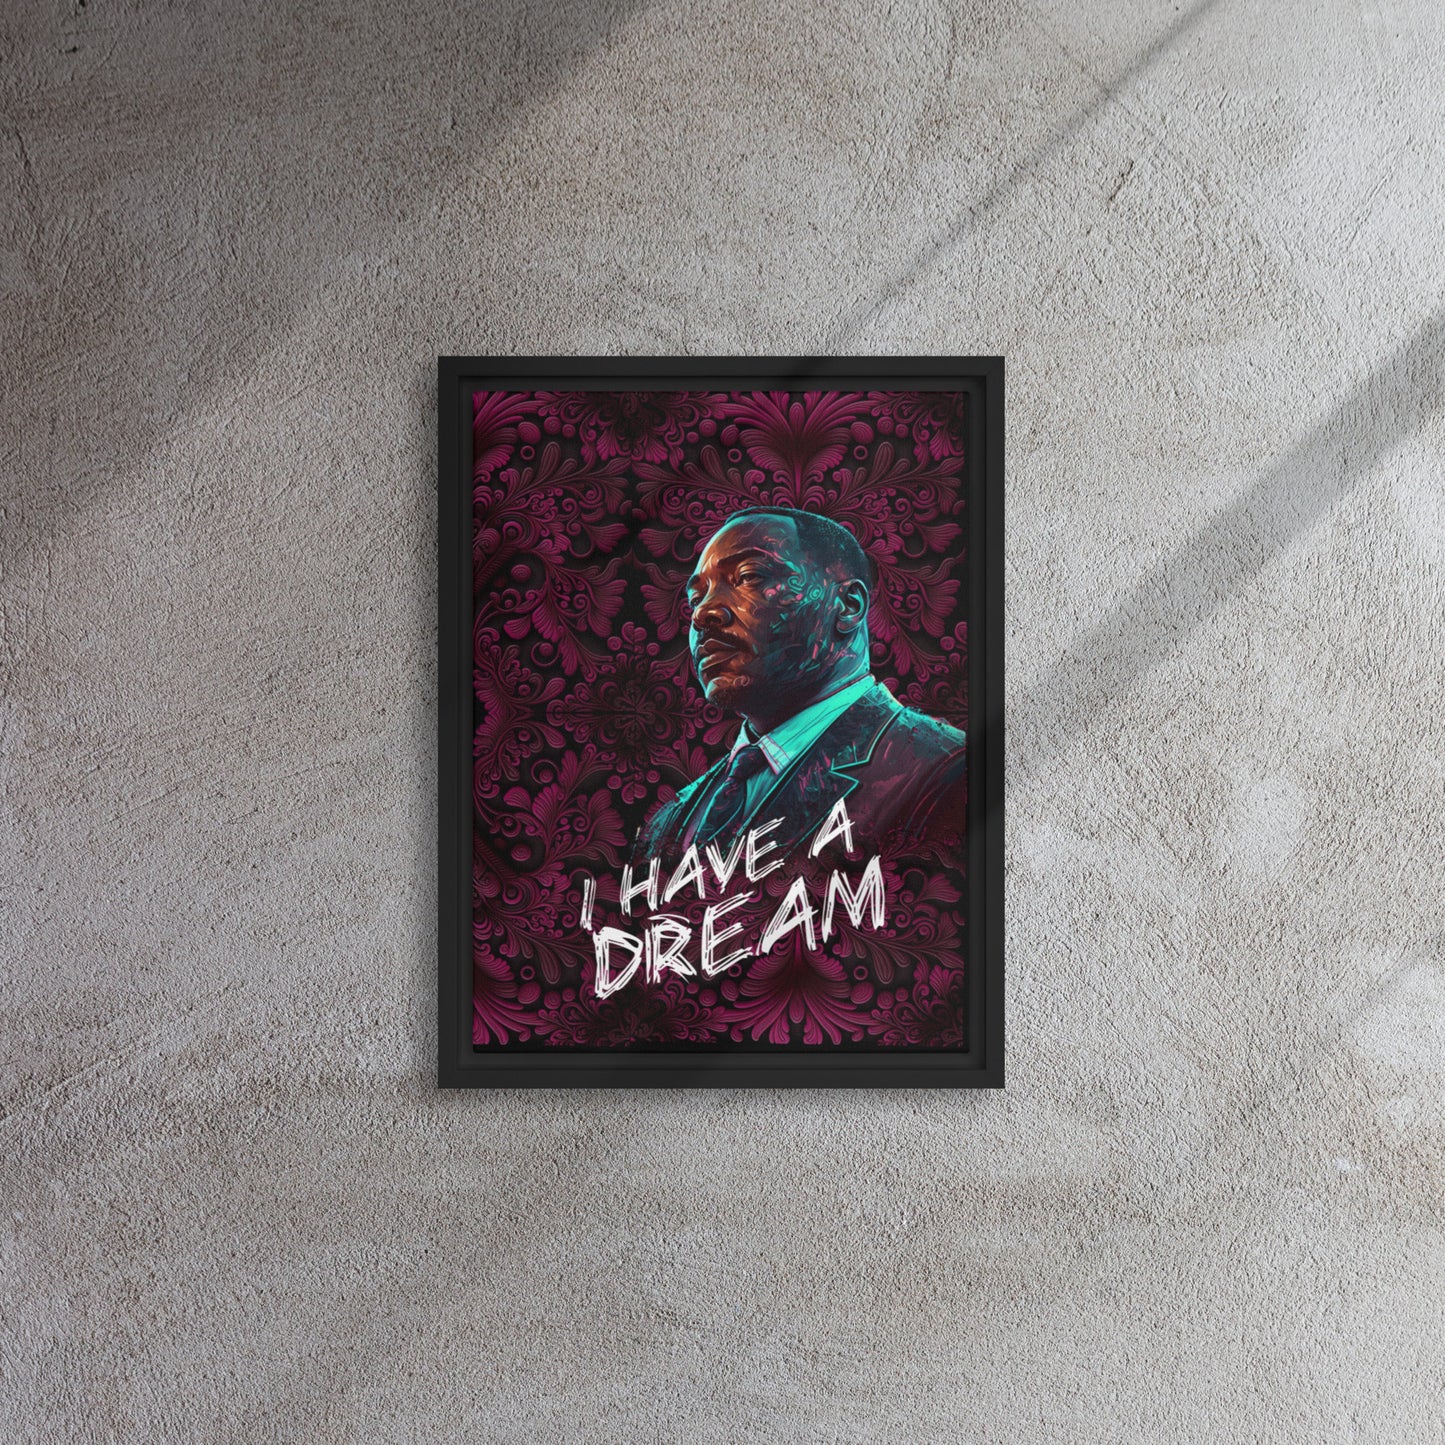 I have a Dream - Framed canvas